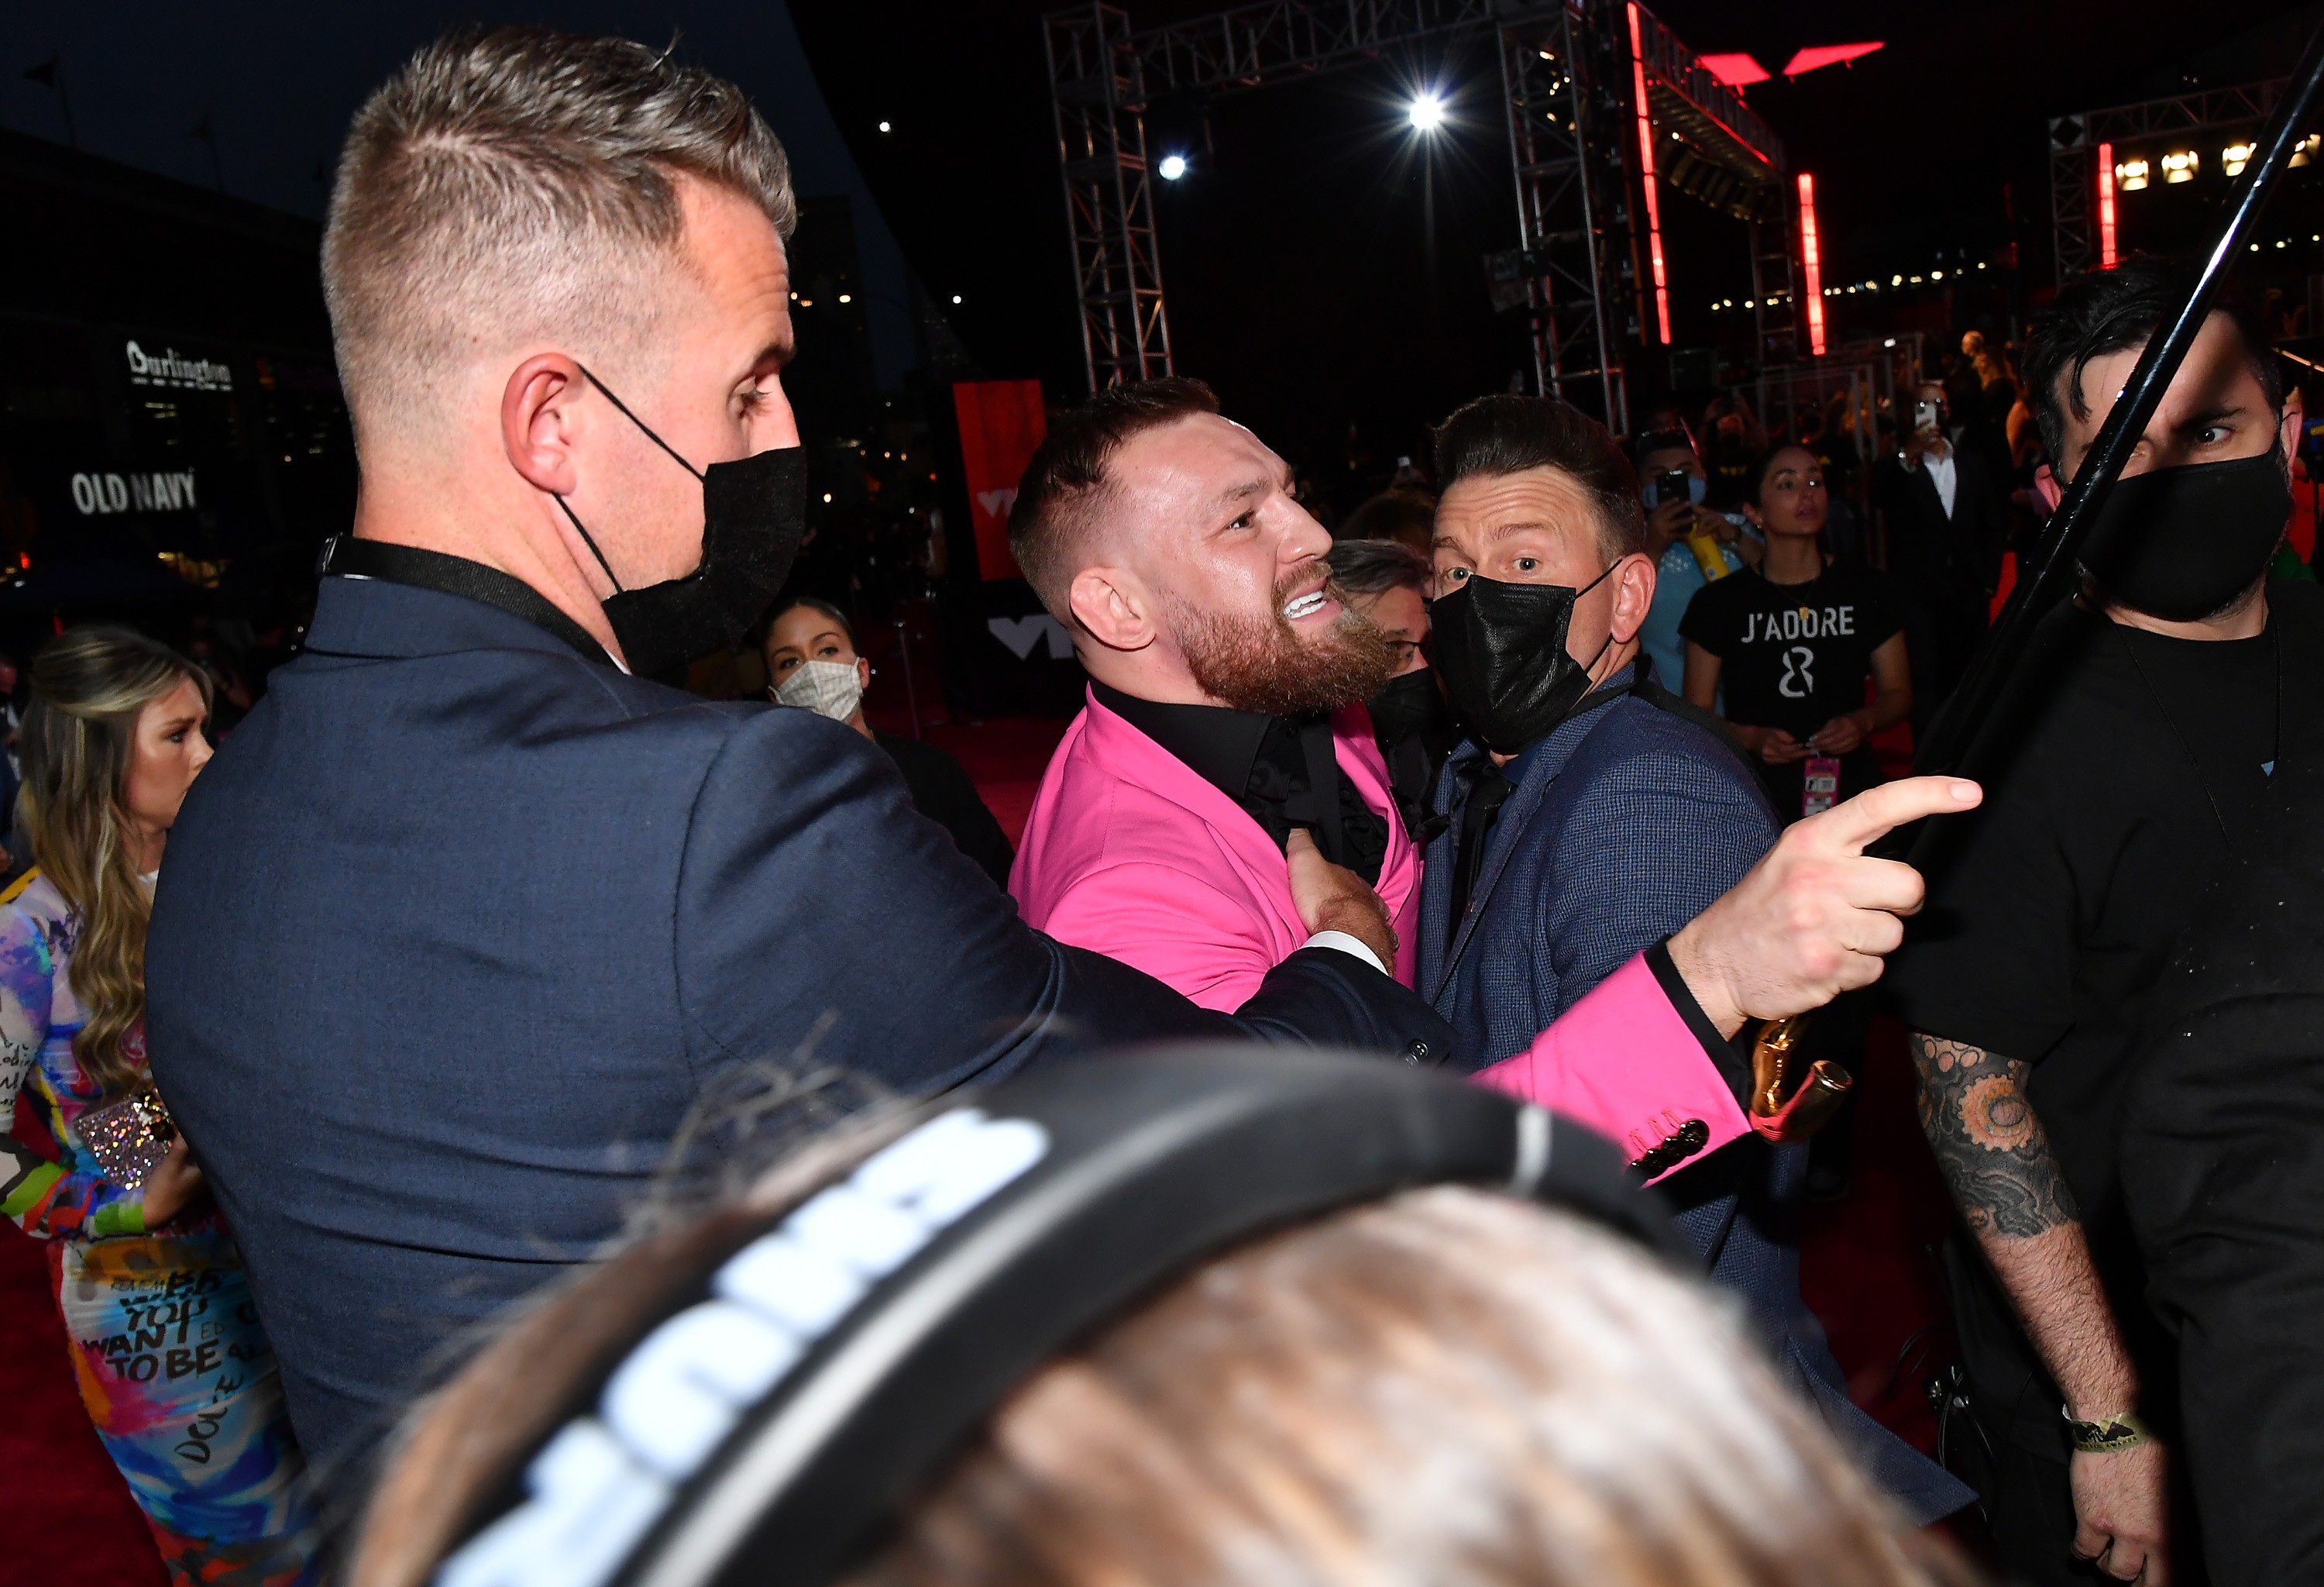 NEW YORK, NEW YORK - SEPTEMBER 12: Conor McGregor attends the 2021 MTV Video Music Awards at Barclays Center on September 12, 2021 in the Brooklyn borough of New York City. (Photo by Jeff Kravitz/MTV VMAs 2021/Getty Images for MTV/ViacomCBS) (Foto: Getty Images for MTV/ViacomCBS)